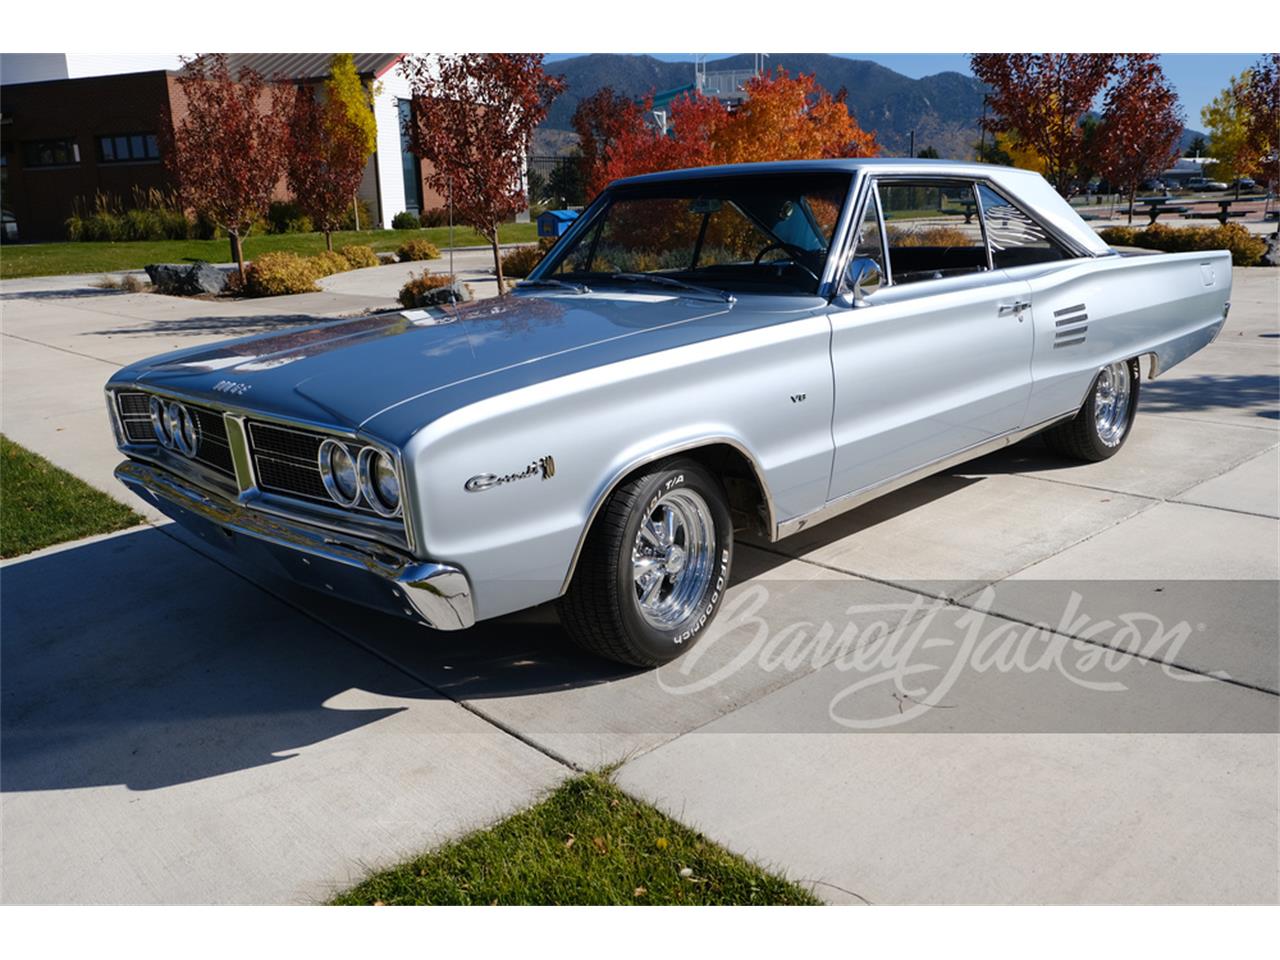 For Sale at Auction: 1966 Dodge Coronet 500 in Scottsdale, Arizona for sale in Scottsdale, AZ